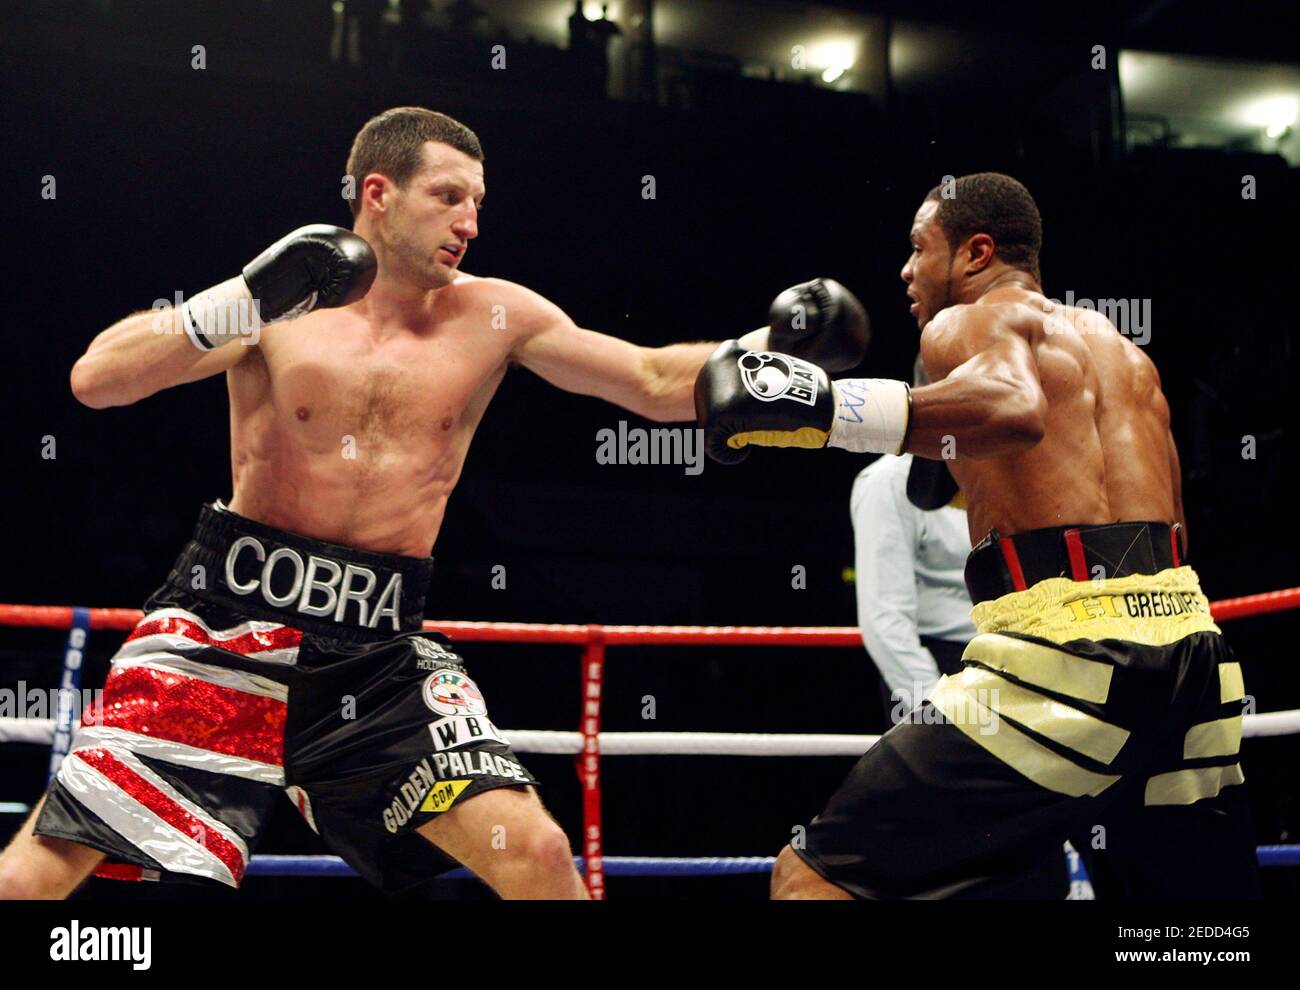 Boxing - Carl Froch v Jean Pascal WBC Super Middleweight Title - Trent FM  Arena, Nottingham - 6/12/